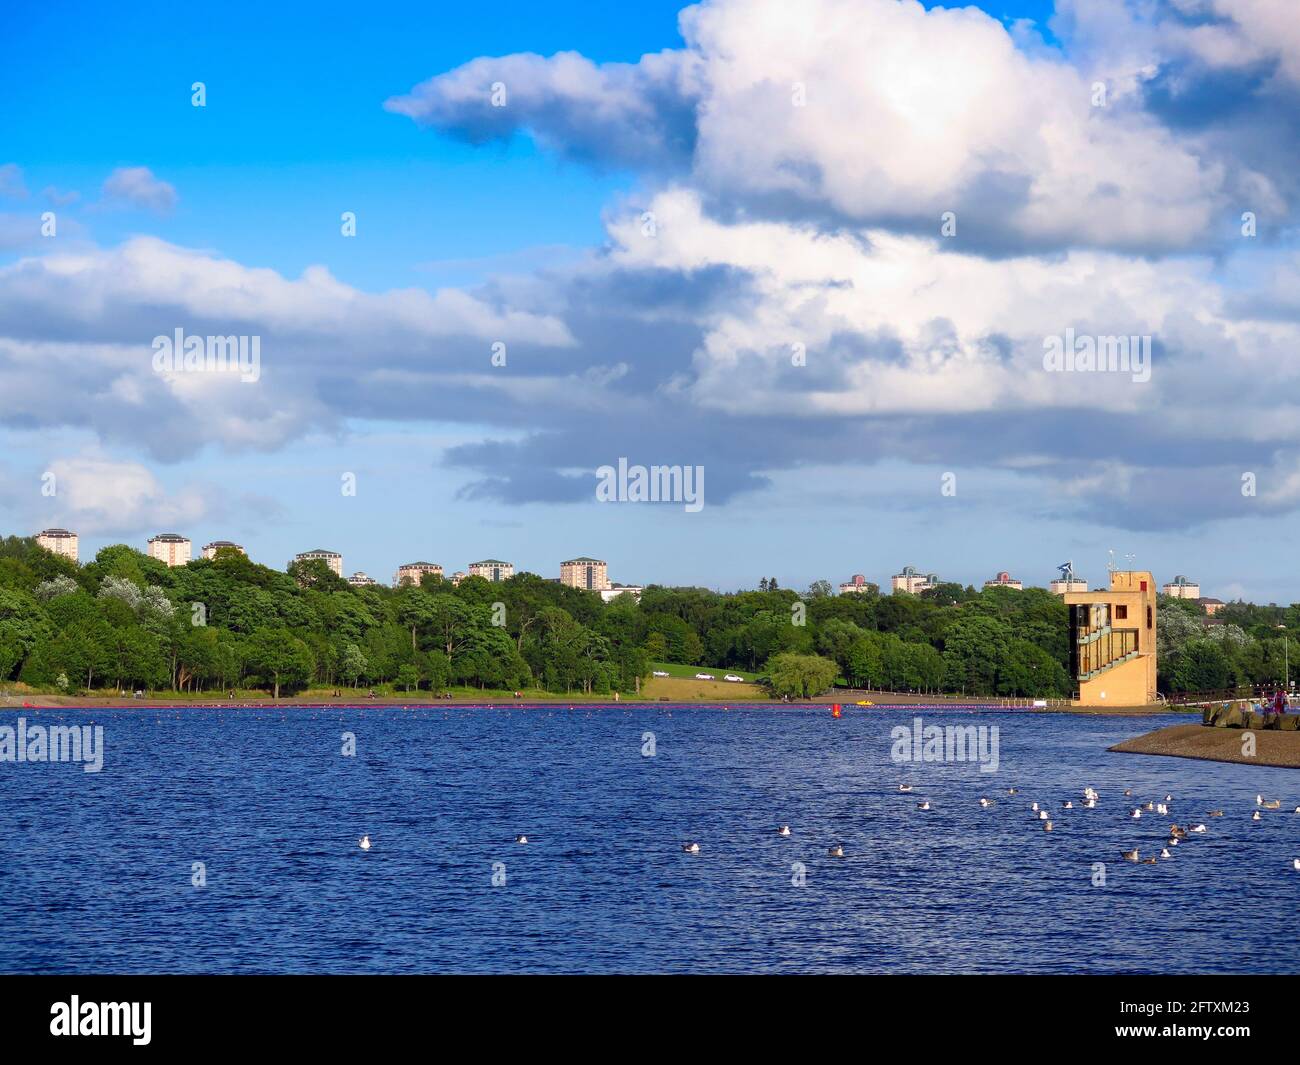 National Rowing Centre Strathclyde Park observation tower Stock Photo